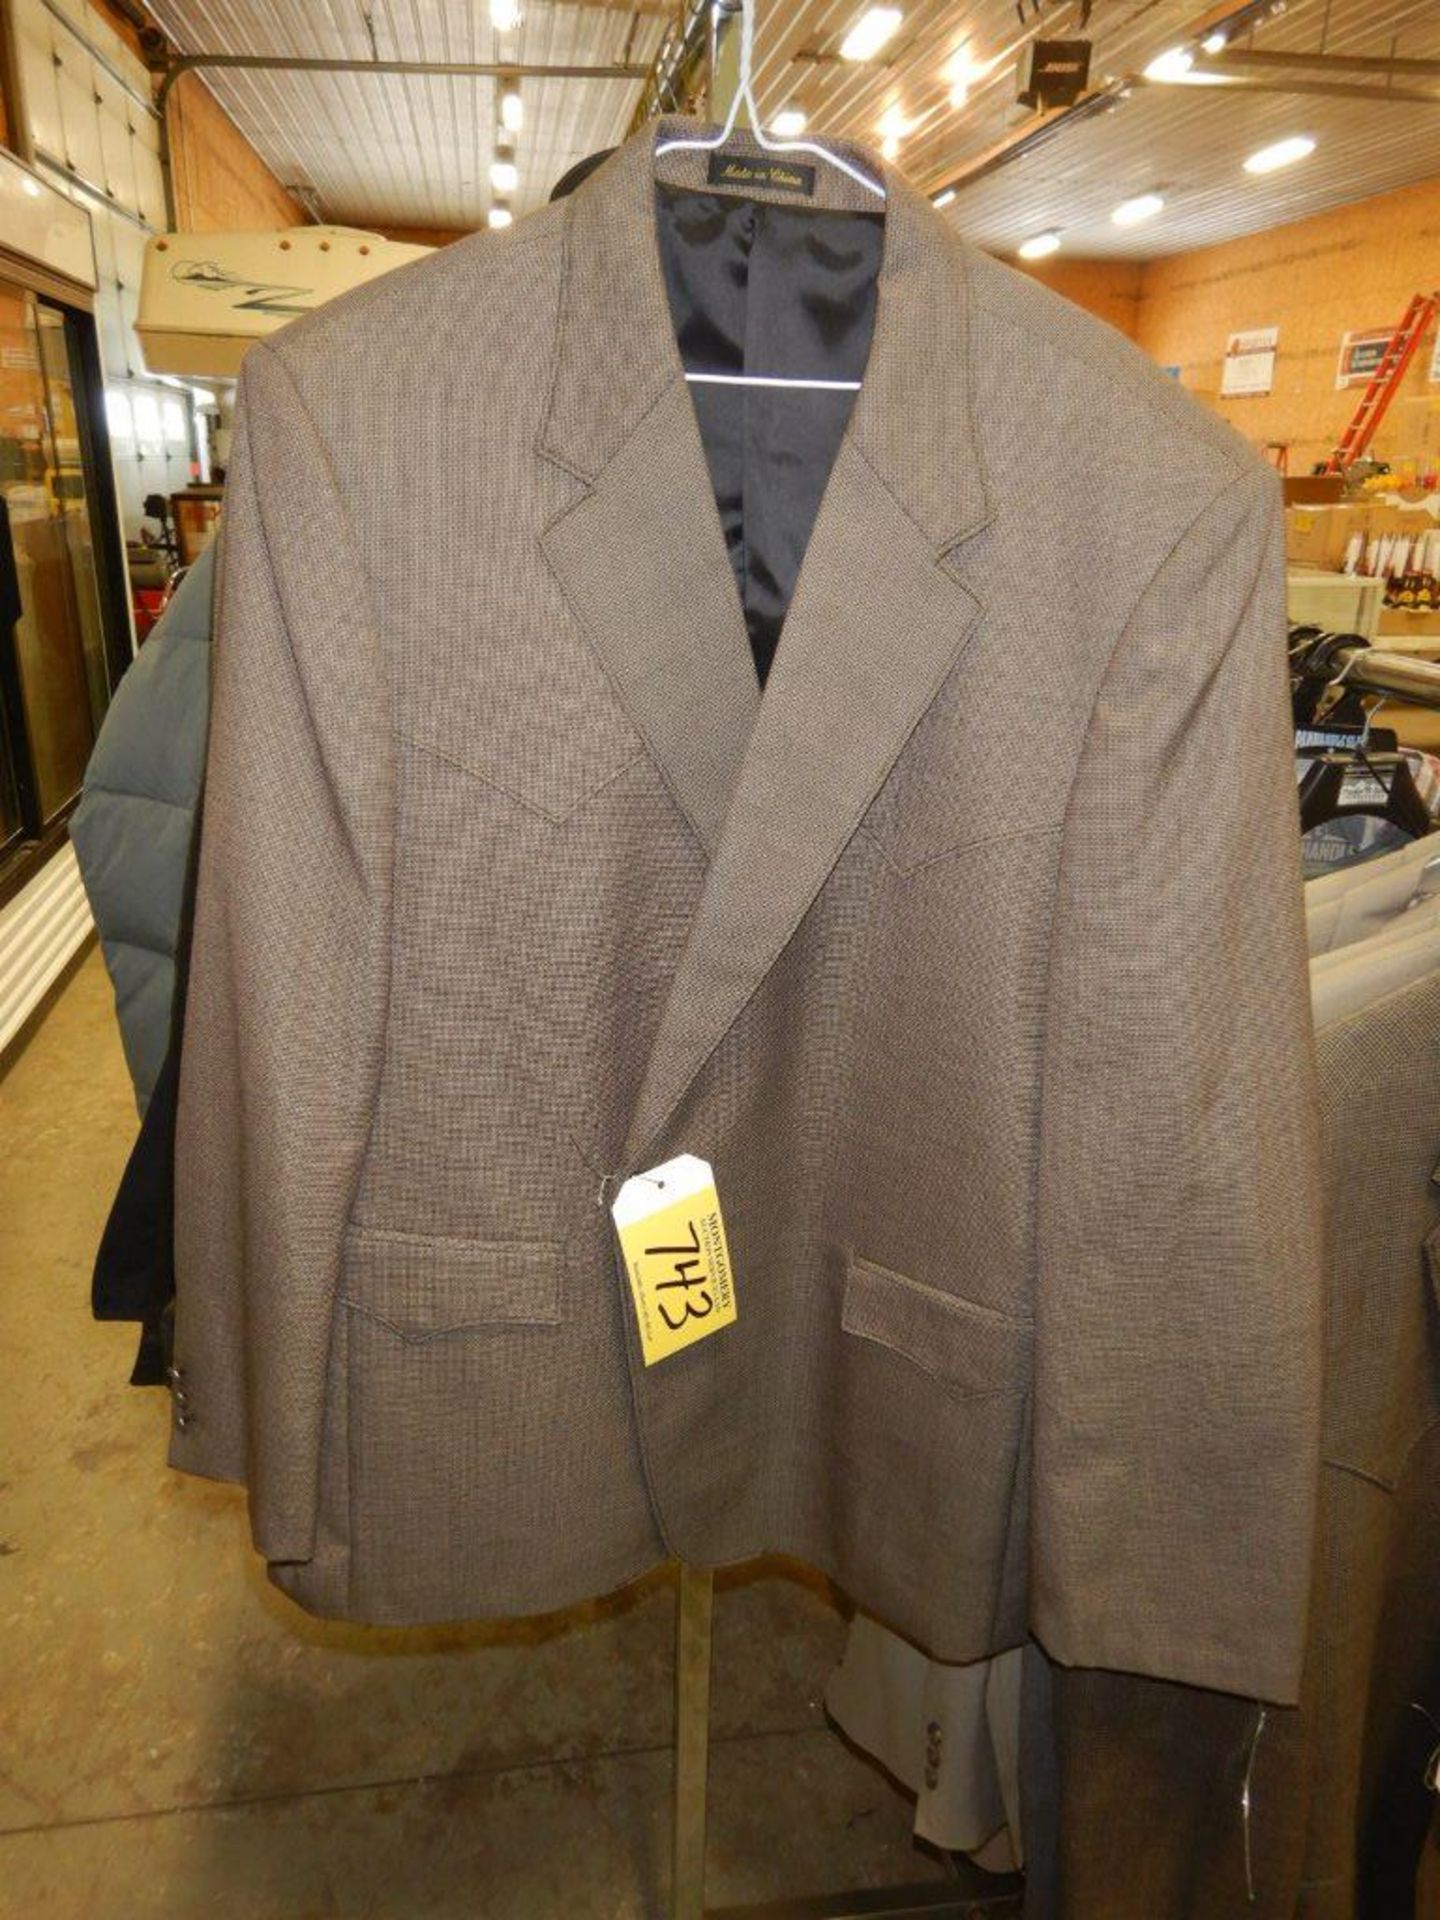 3-CIRCLE S WOOL WESTERN SUIT JACKETS, SIZE 50R - Image 2 of 3